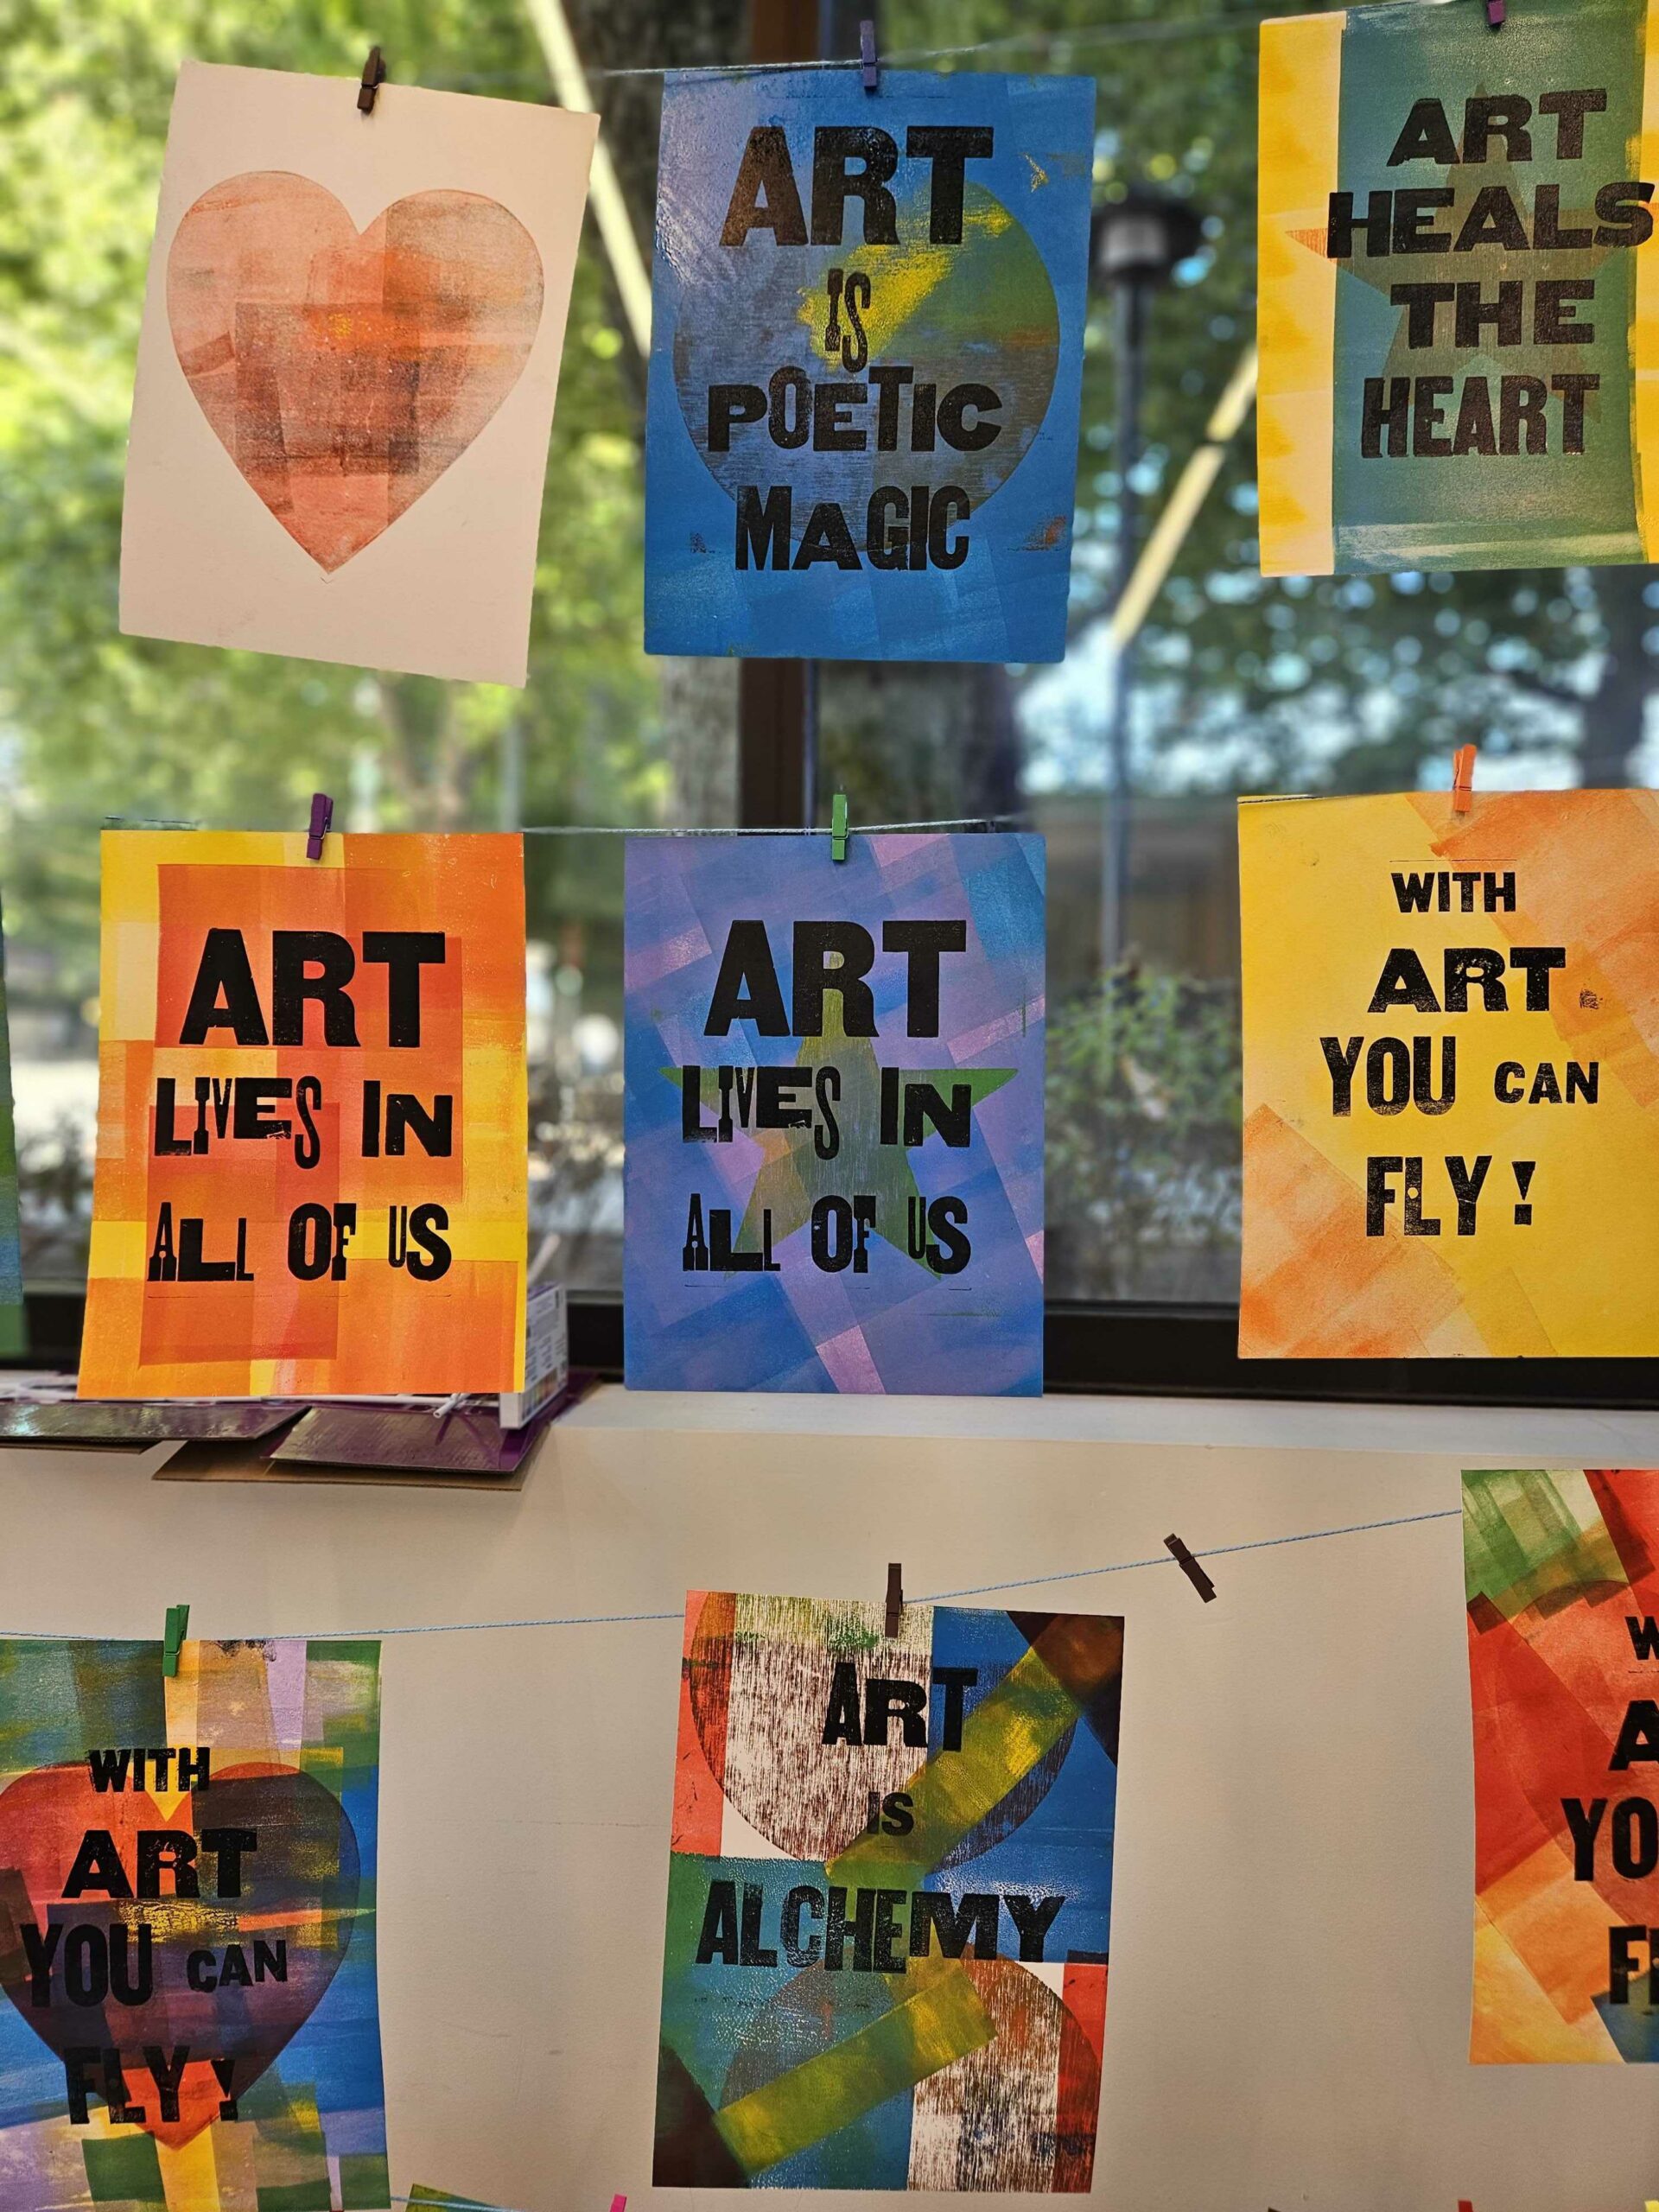 A wall of colorful prints hanging on strings with clothespins with messages reading "Art is Poetic Magic," "Art heals the heart," and "Art lives in all of us"